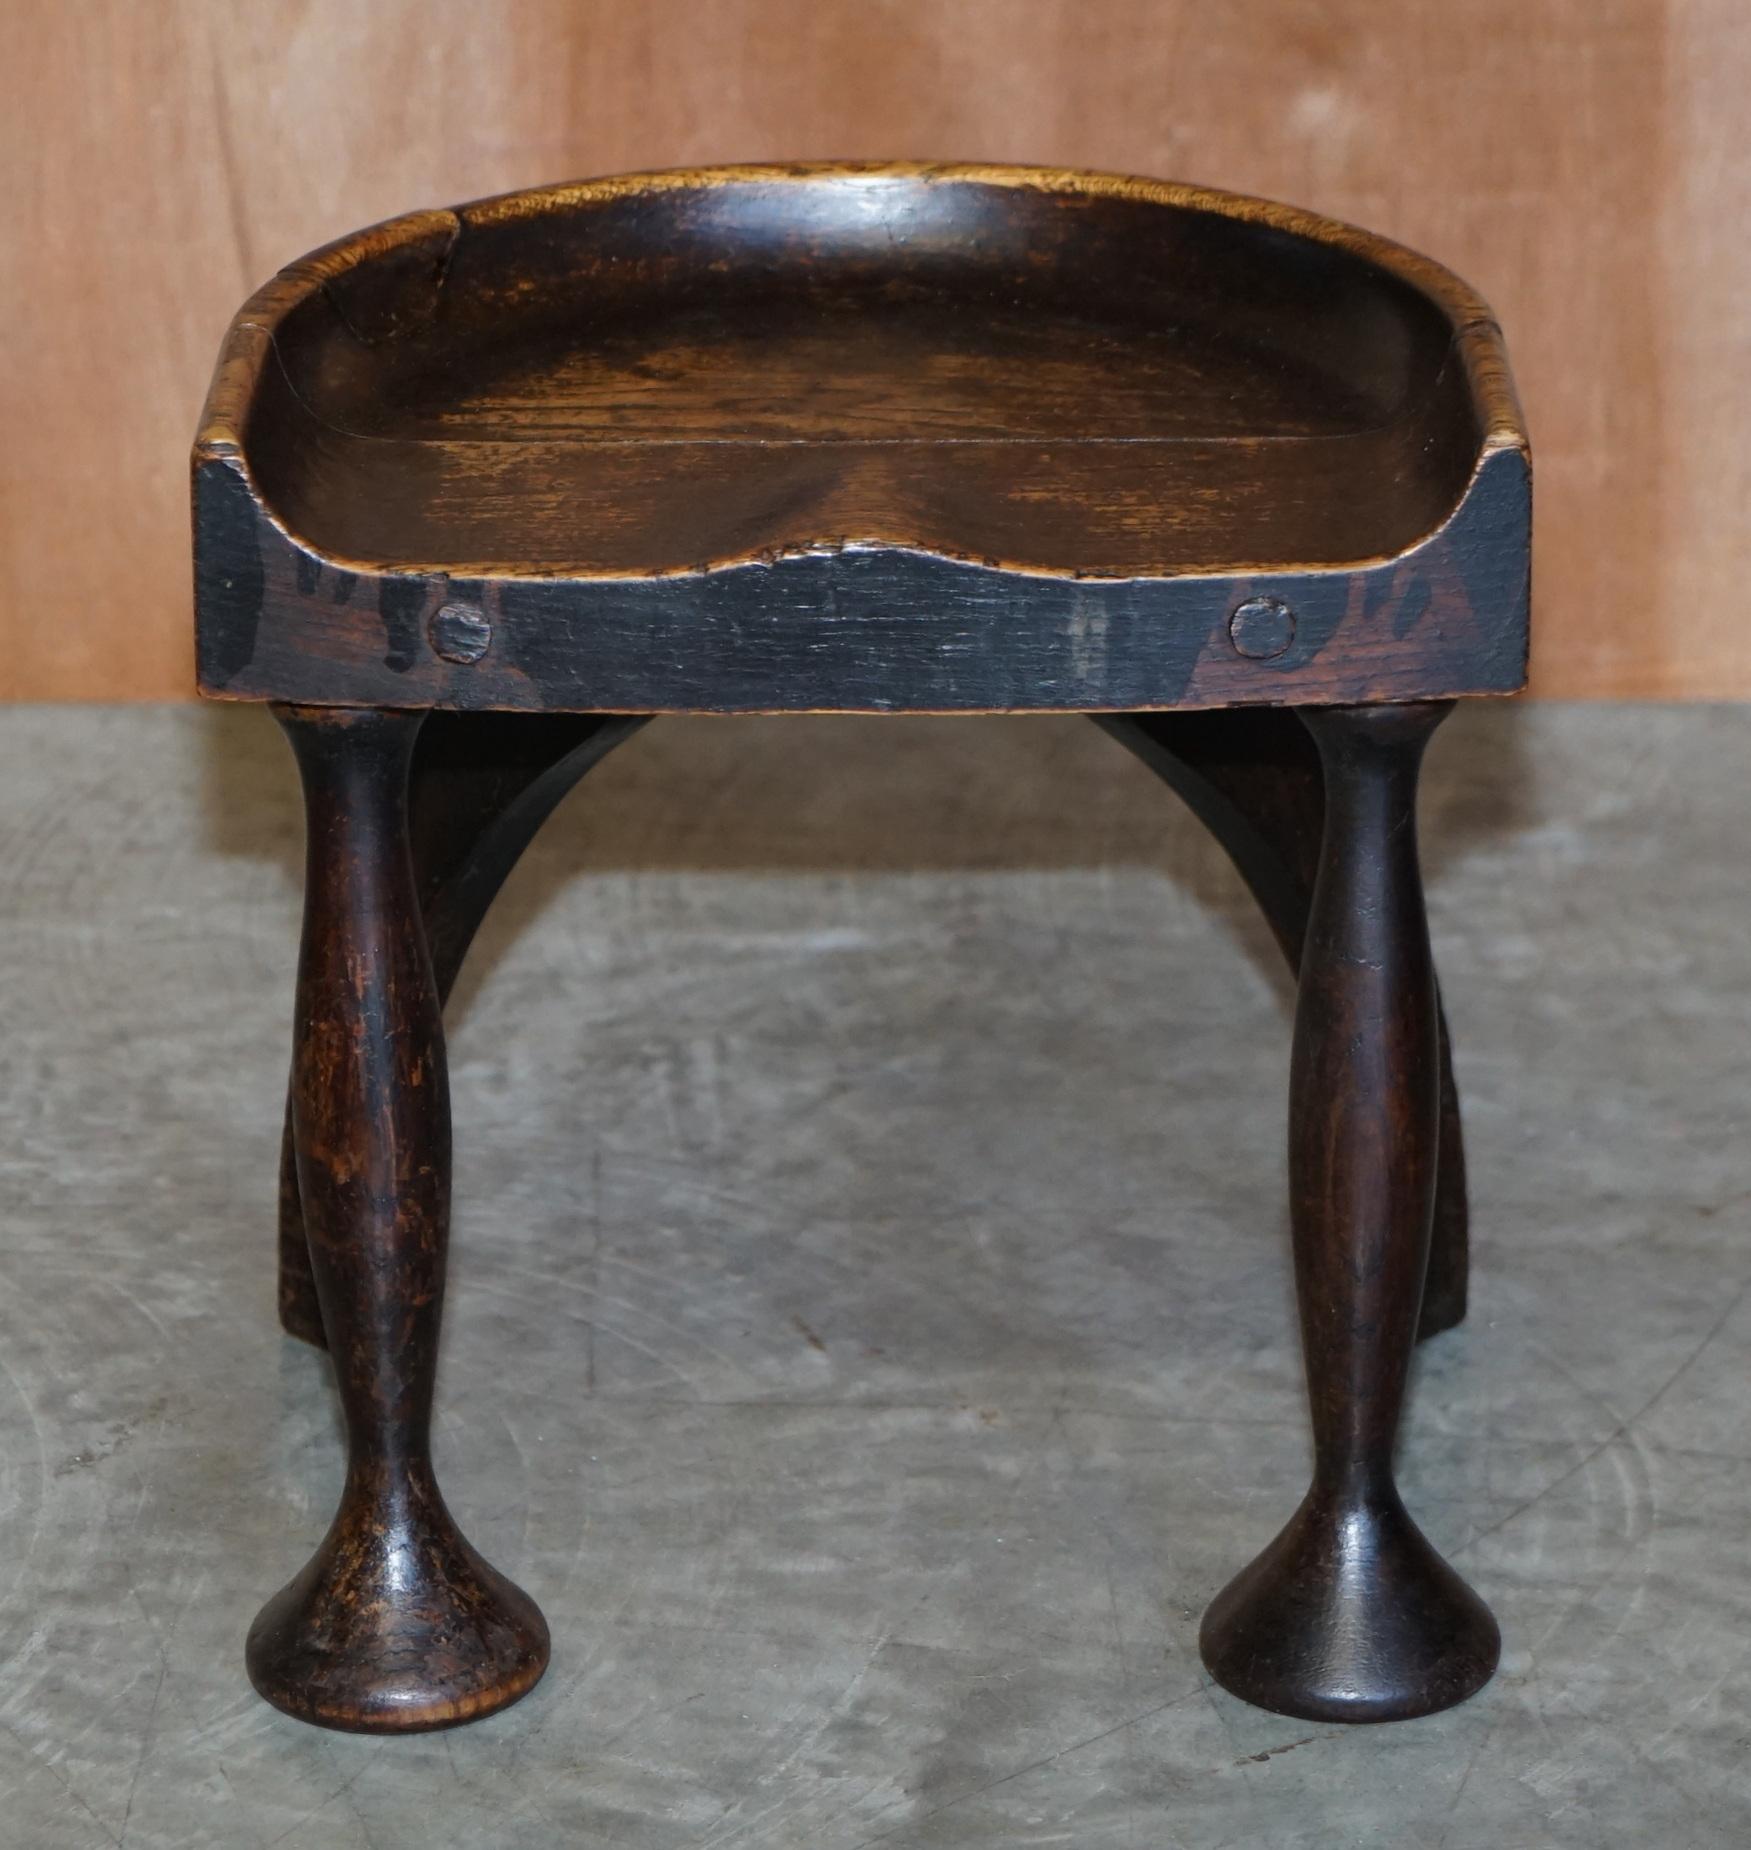 We are delighted to offer this absolutely stunning circa 1880 dowelled oak jointed Liberty’s London style stool

A very good looking decorative and well made piece, it has a period patina which is to die for, it looks so full of English country